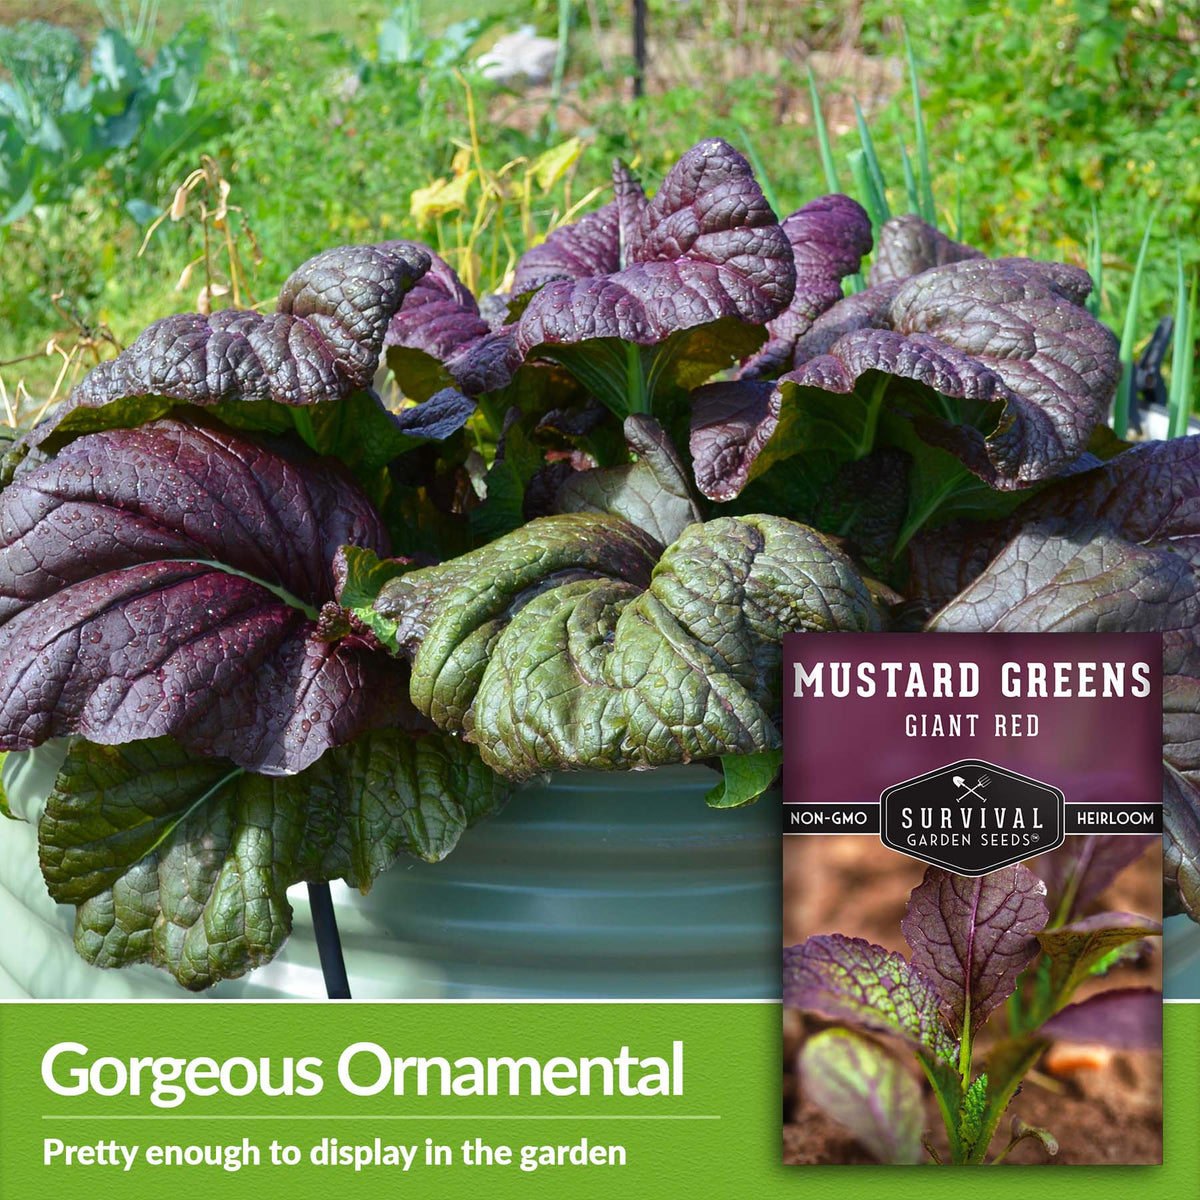 Giant Red Mustard Greens are a gorgeous ornamental